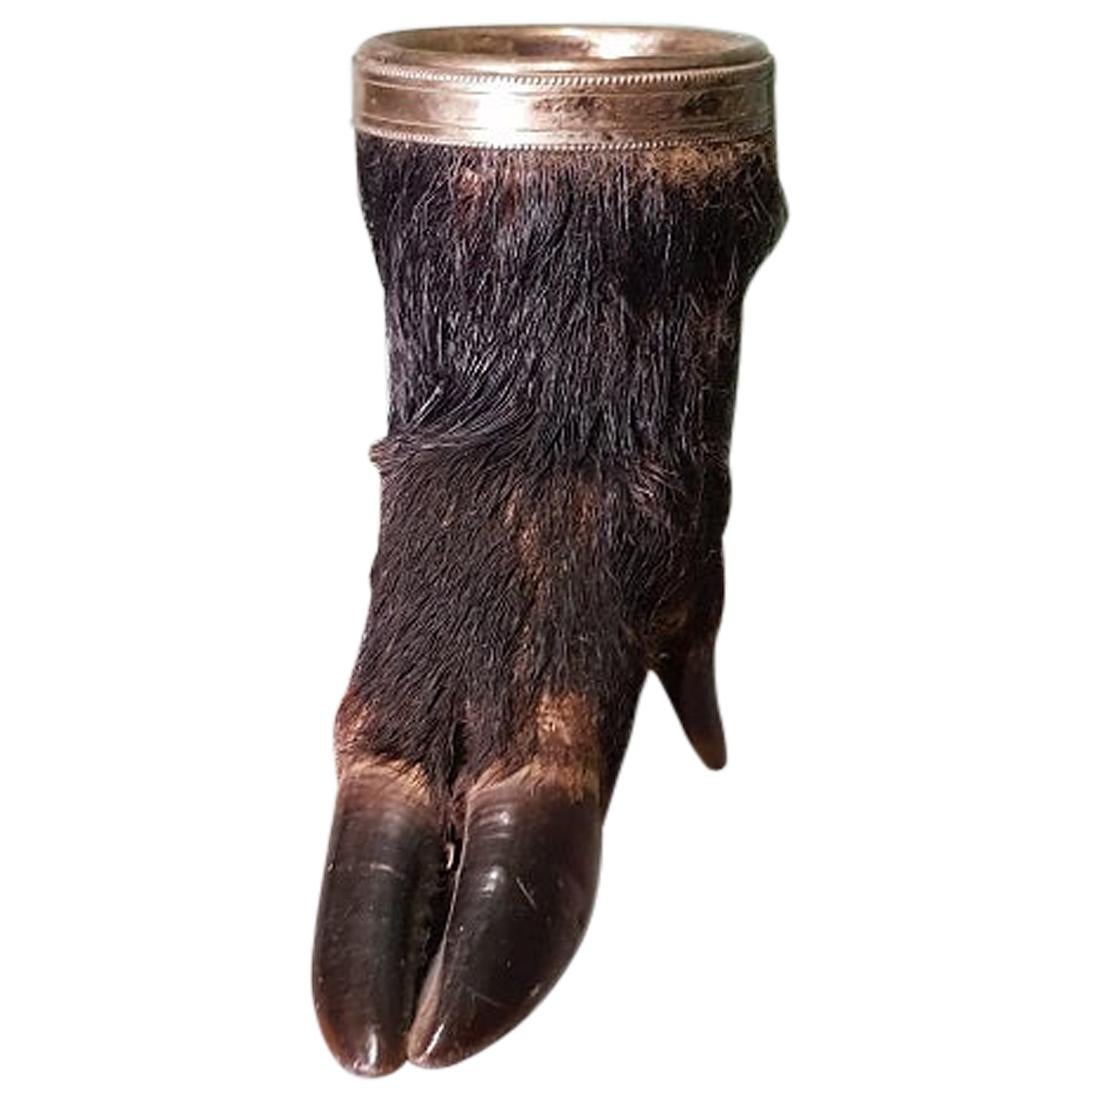 Early 20th Century French Taxidermy of a Wild Pig Leg with Cup Holder For Sale